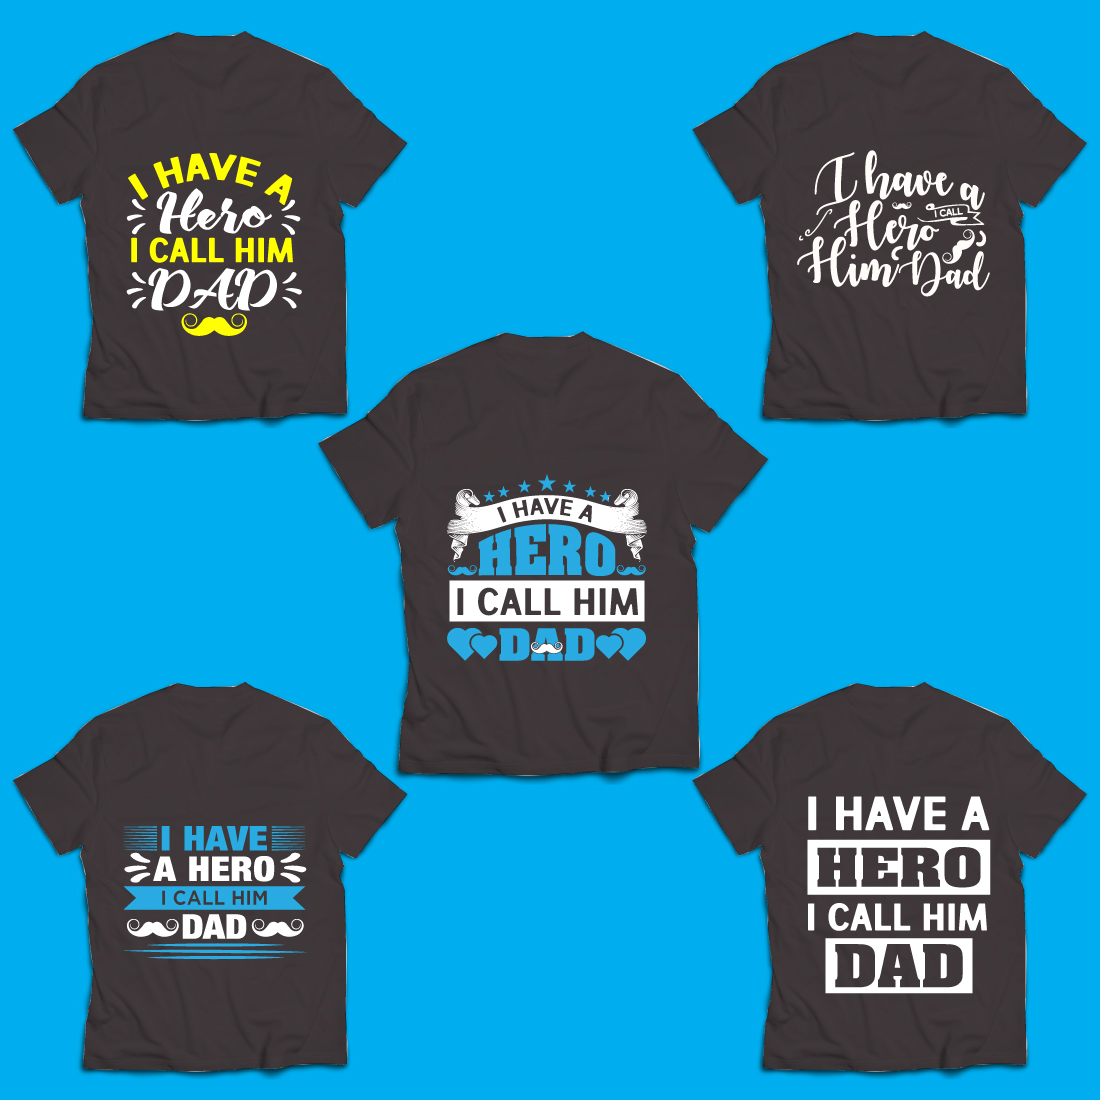 T-Shirt Dad Quote Typography Design cover image.